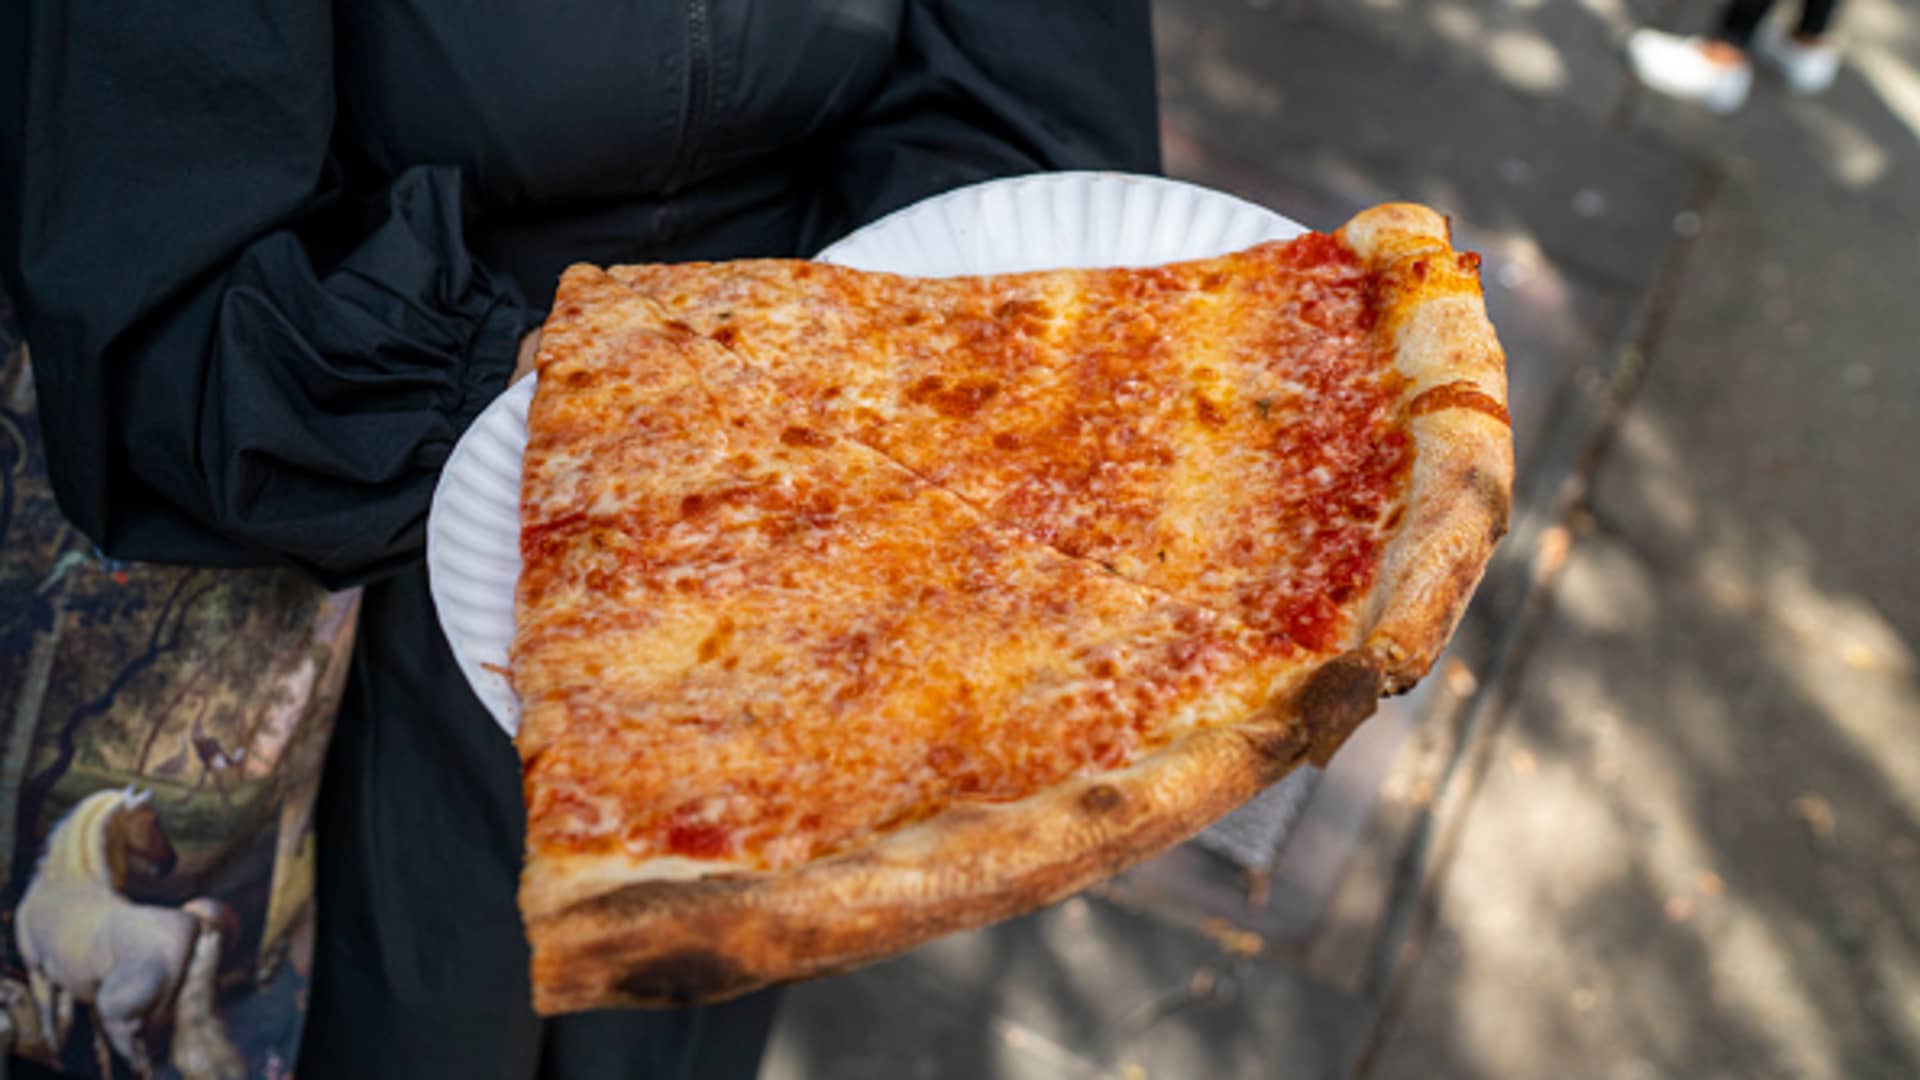 A pair of slices from Joe's Pizza in New York City.